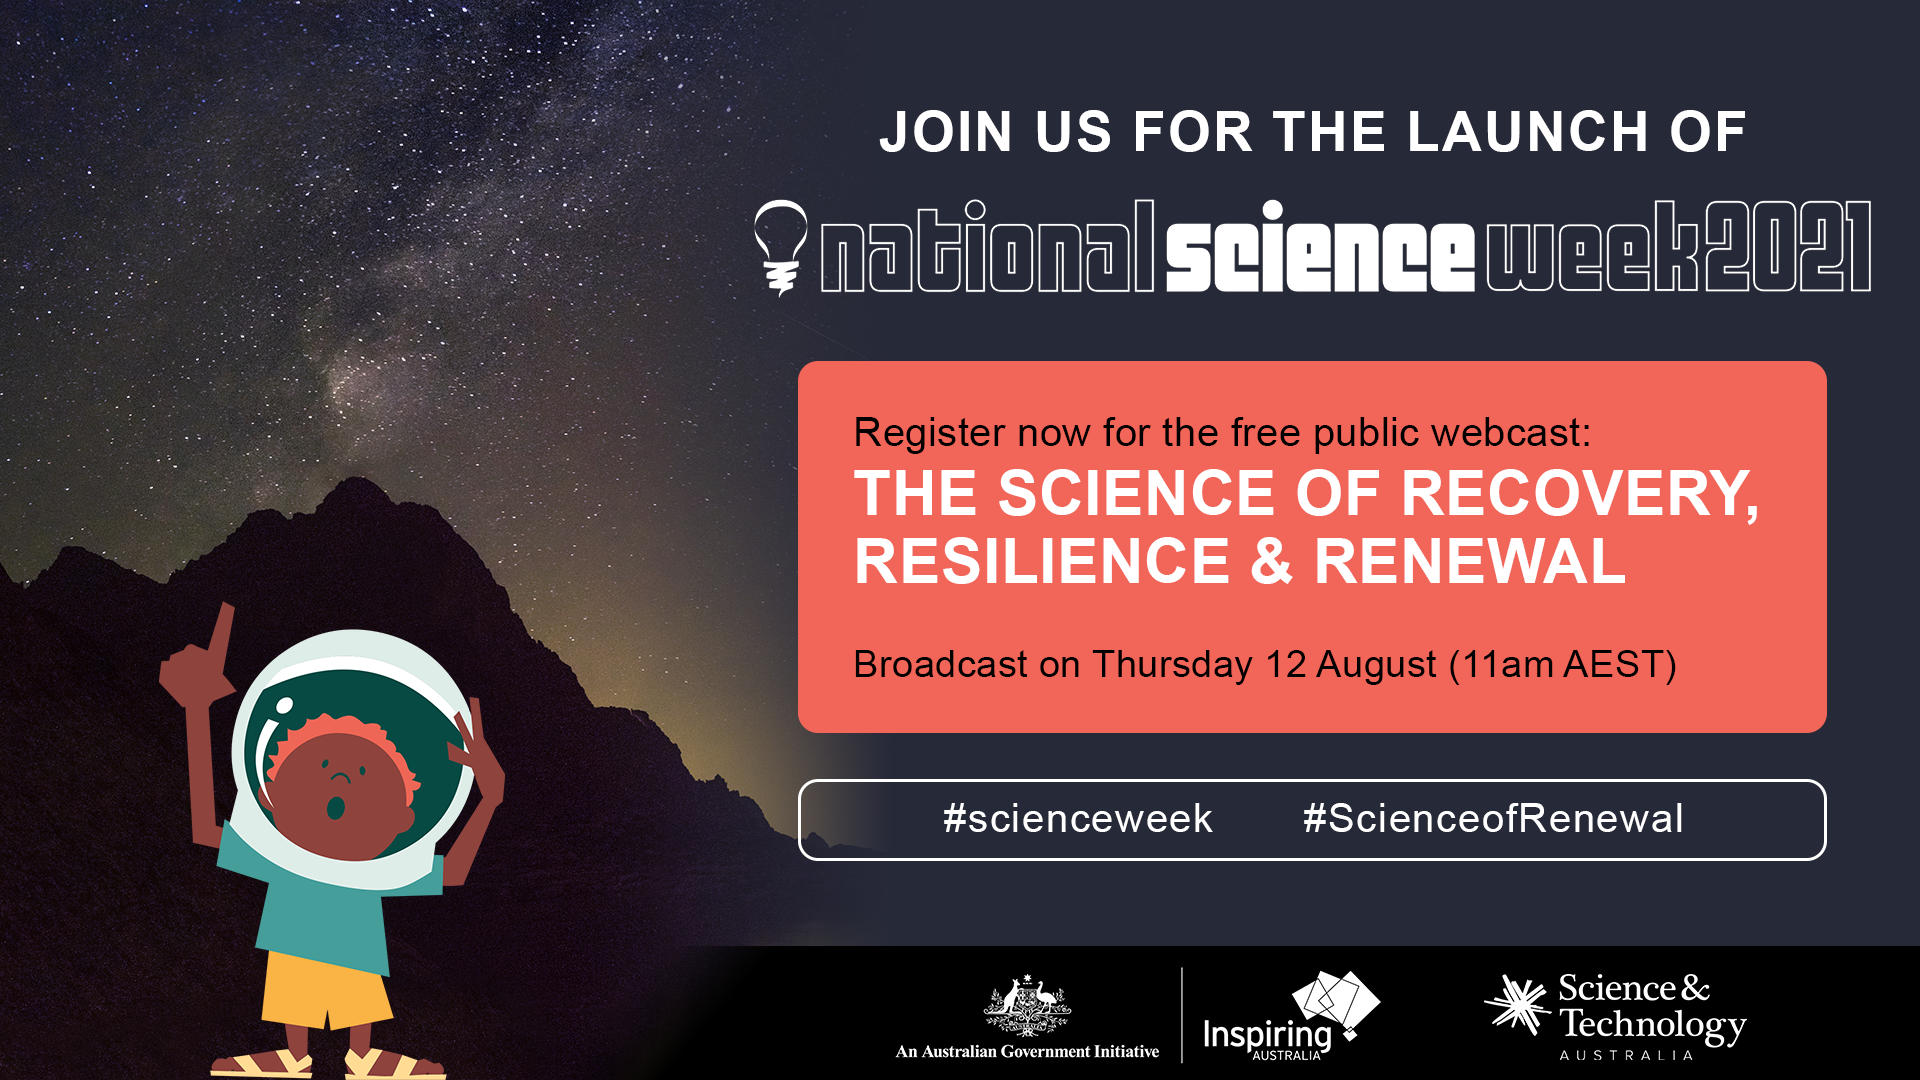 Join us for the launch of National Science Week 2021